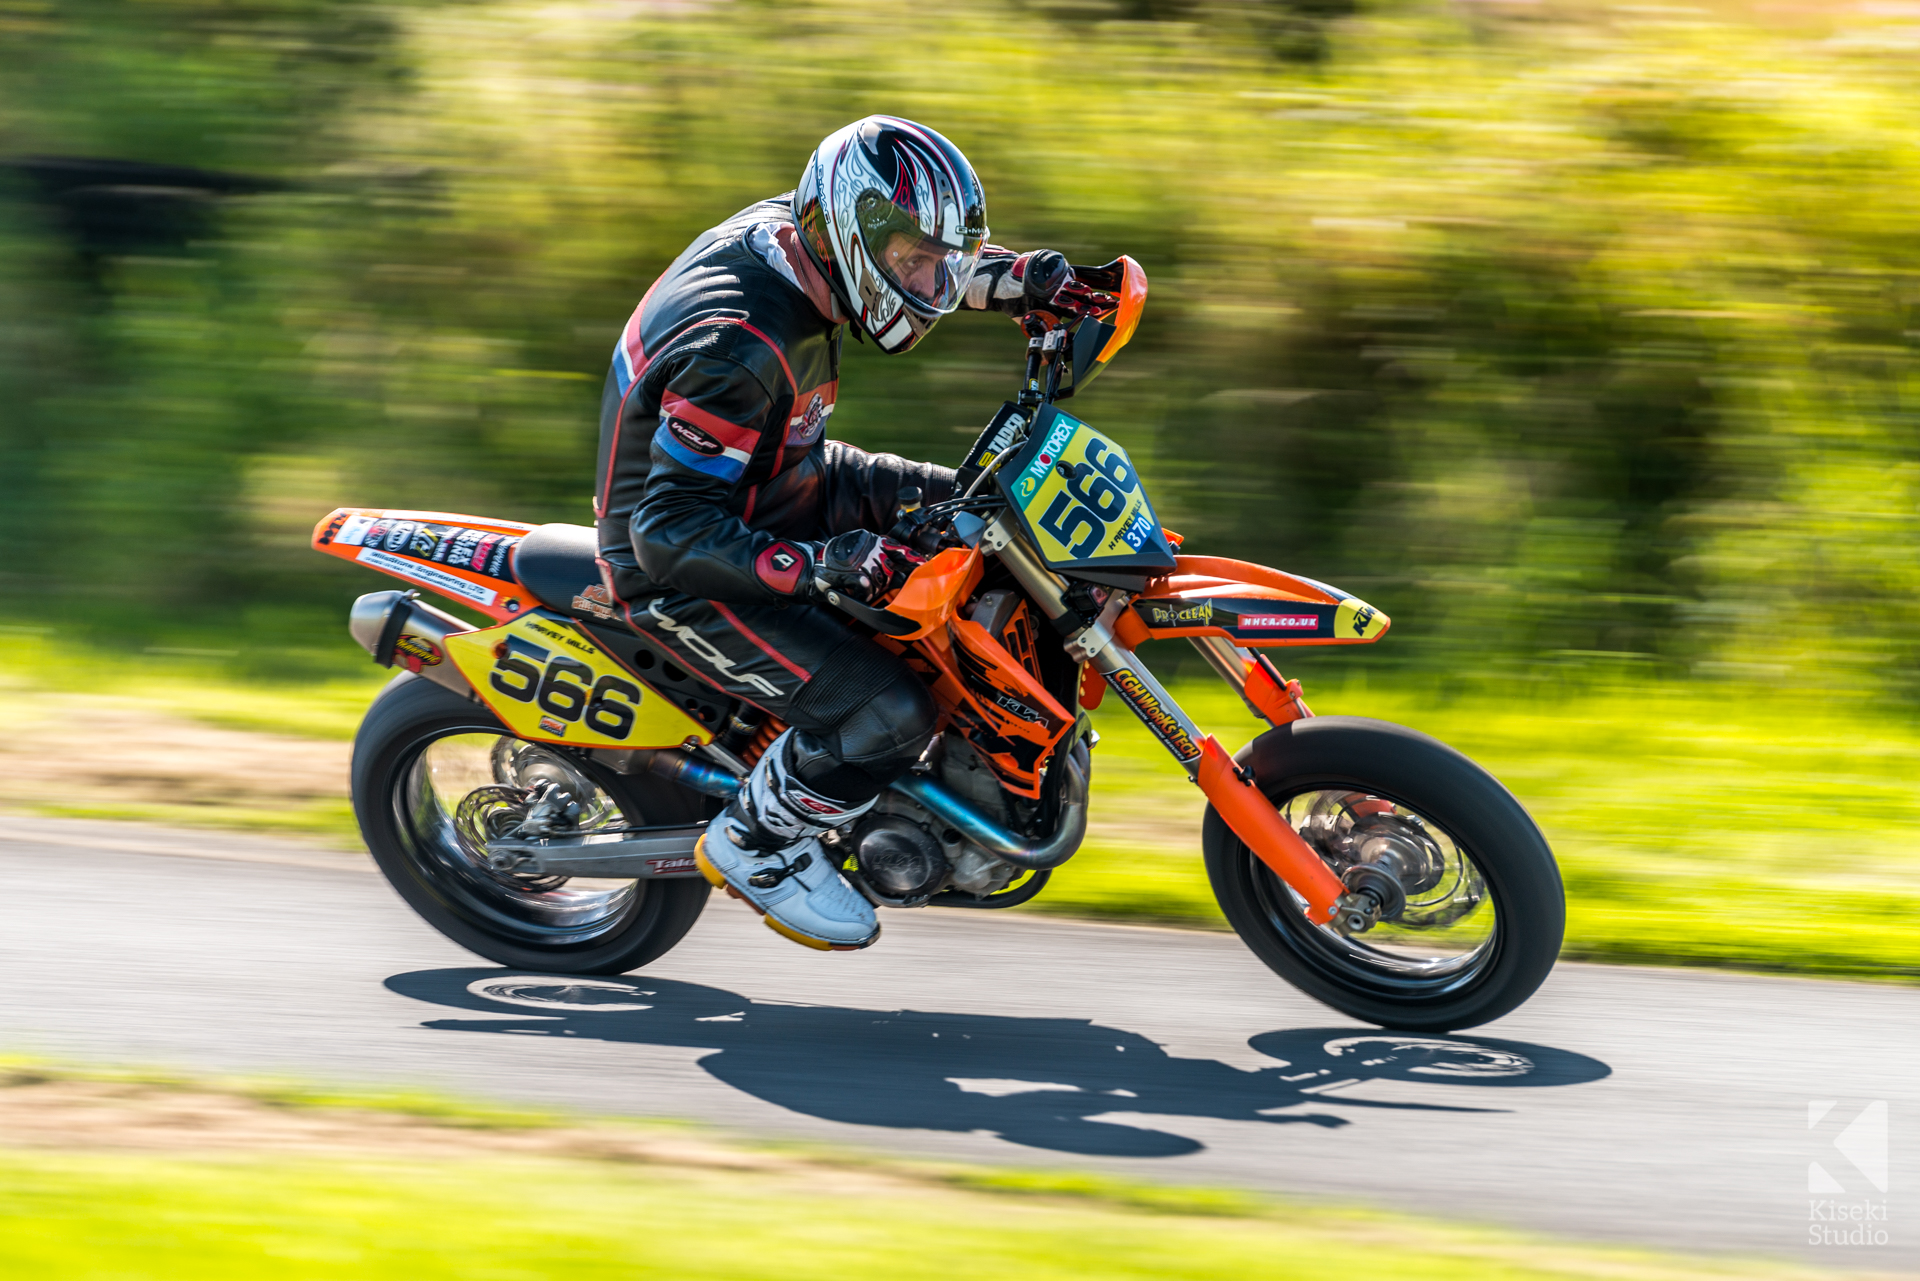 harewood-speed-hillclimb-supermoto-rider-focused-concentrating-leaning-fast-motion